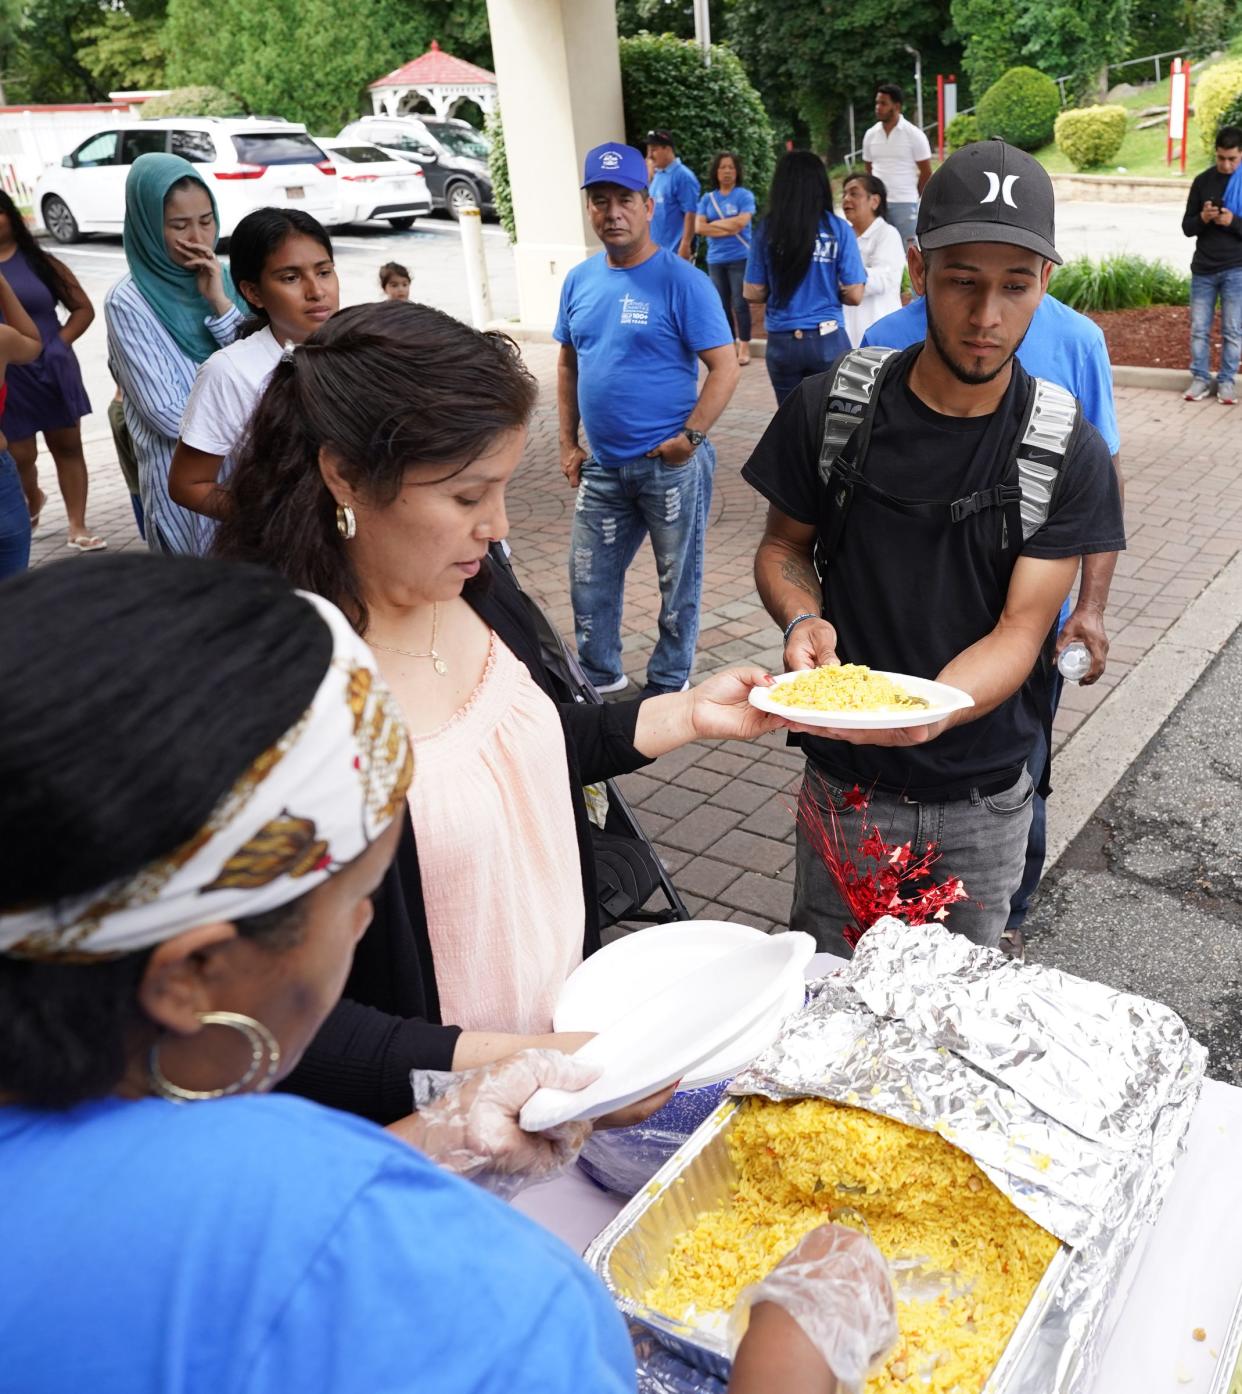 Catholic Charities and Obreros Unidos de Yonkers hosted a lunch for immigrants at the Ramada Inn in Yonkers on Saturday, August 26, 2023.